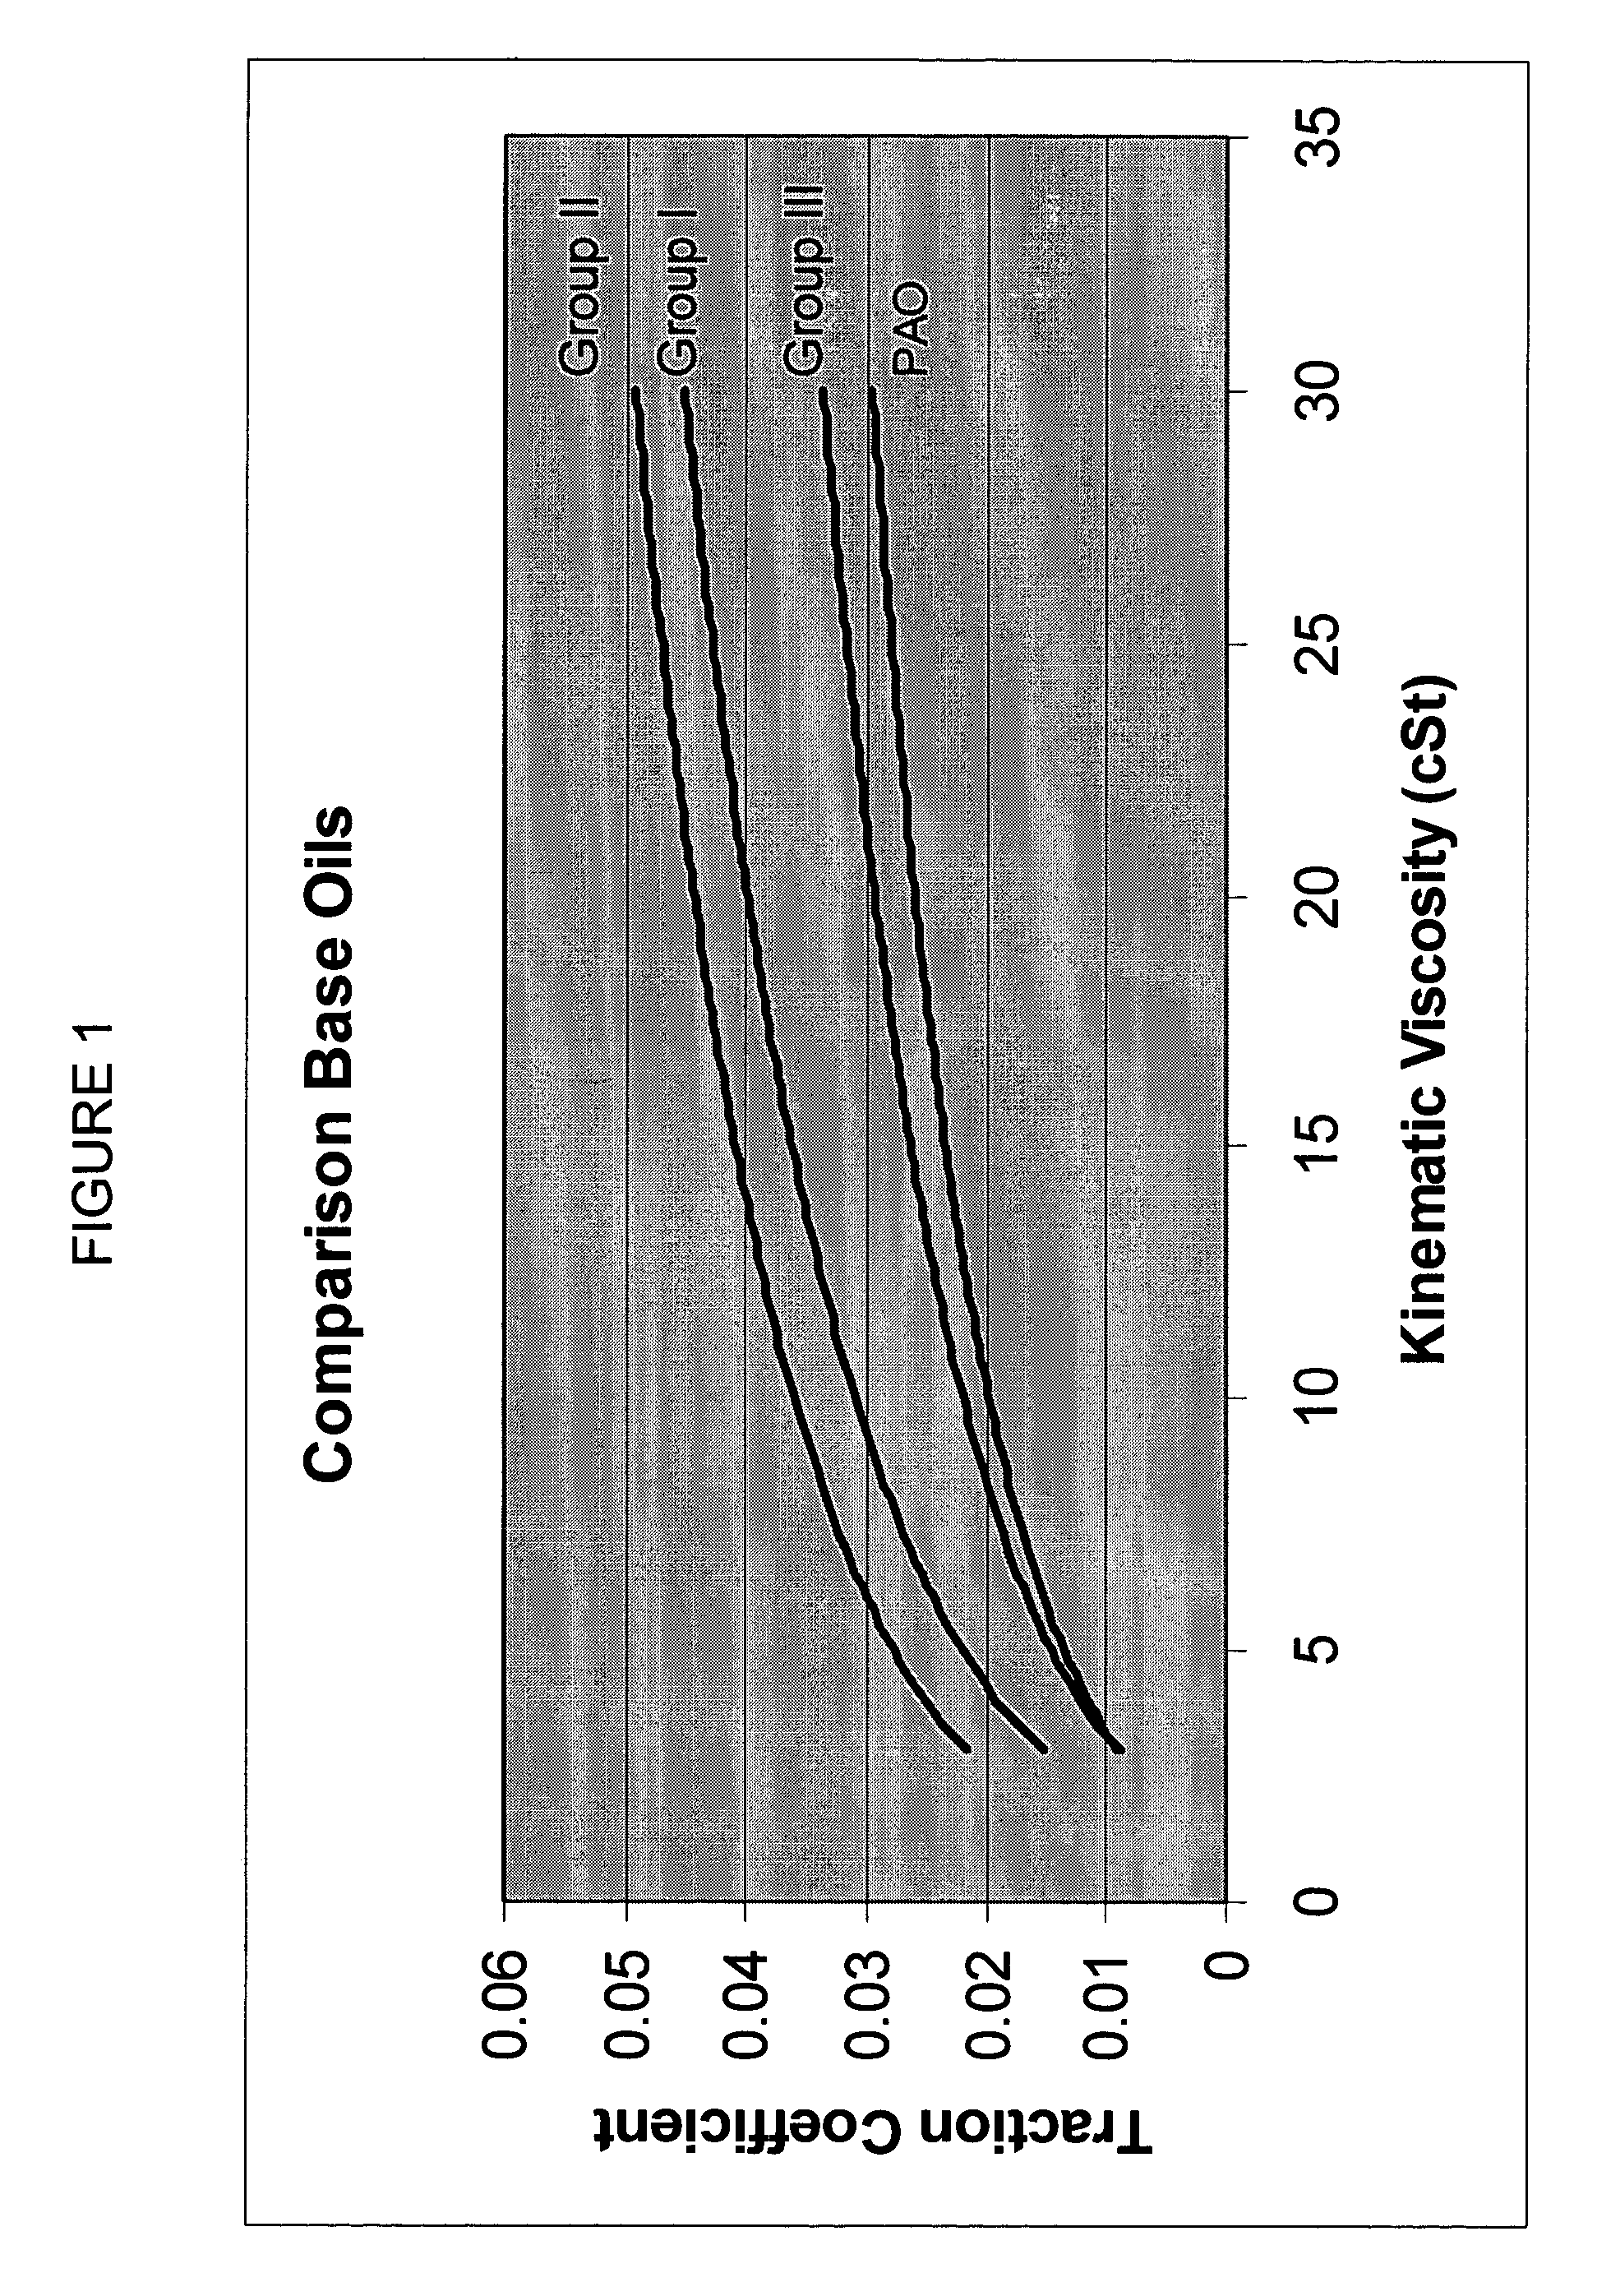 Method of operating a wormgear drive at high energy efficiency